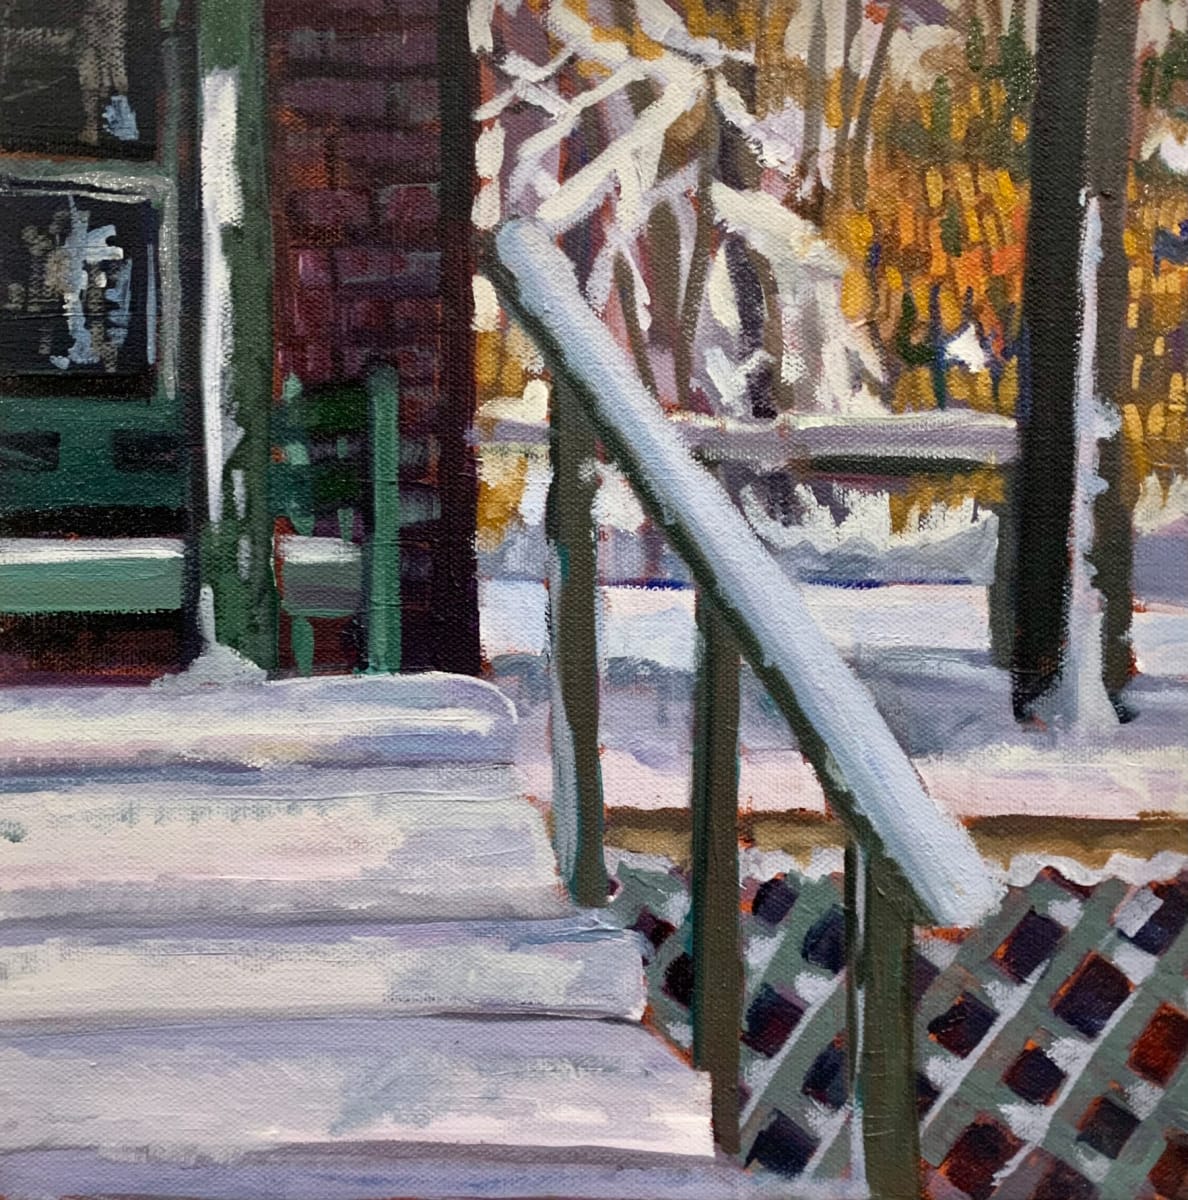 Snowy Cottage Steps by Lynne Ryall  Image: This was a really cold day. I loved the textures on this cottage.